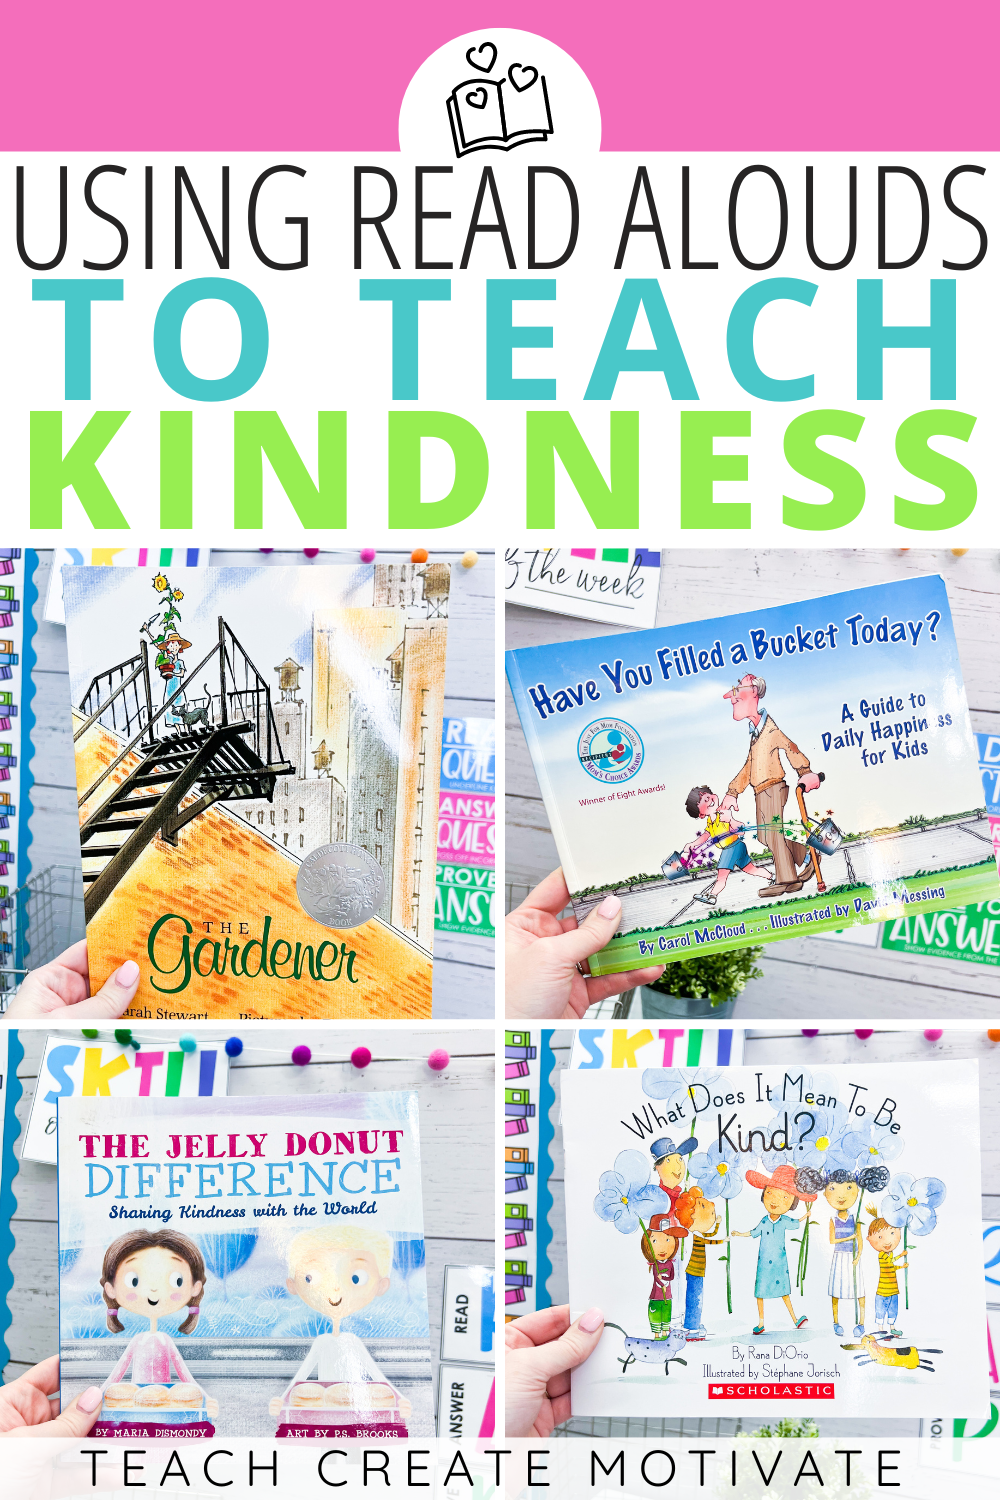 Read-alouds are the perfect tool to teach almost anything to students! Using read-alouds to teach kindness is an easy way to add some social-emotional learning or character education into your lesson plans. 10 read-alouds all about kindness.